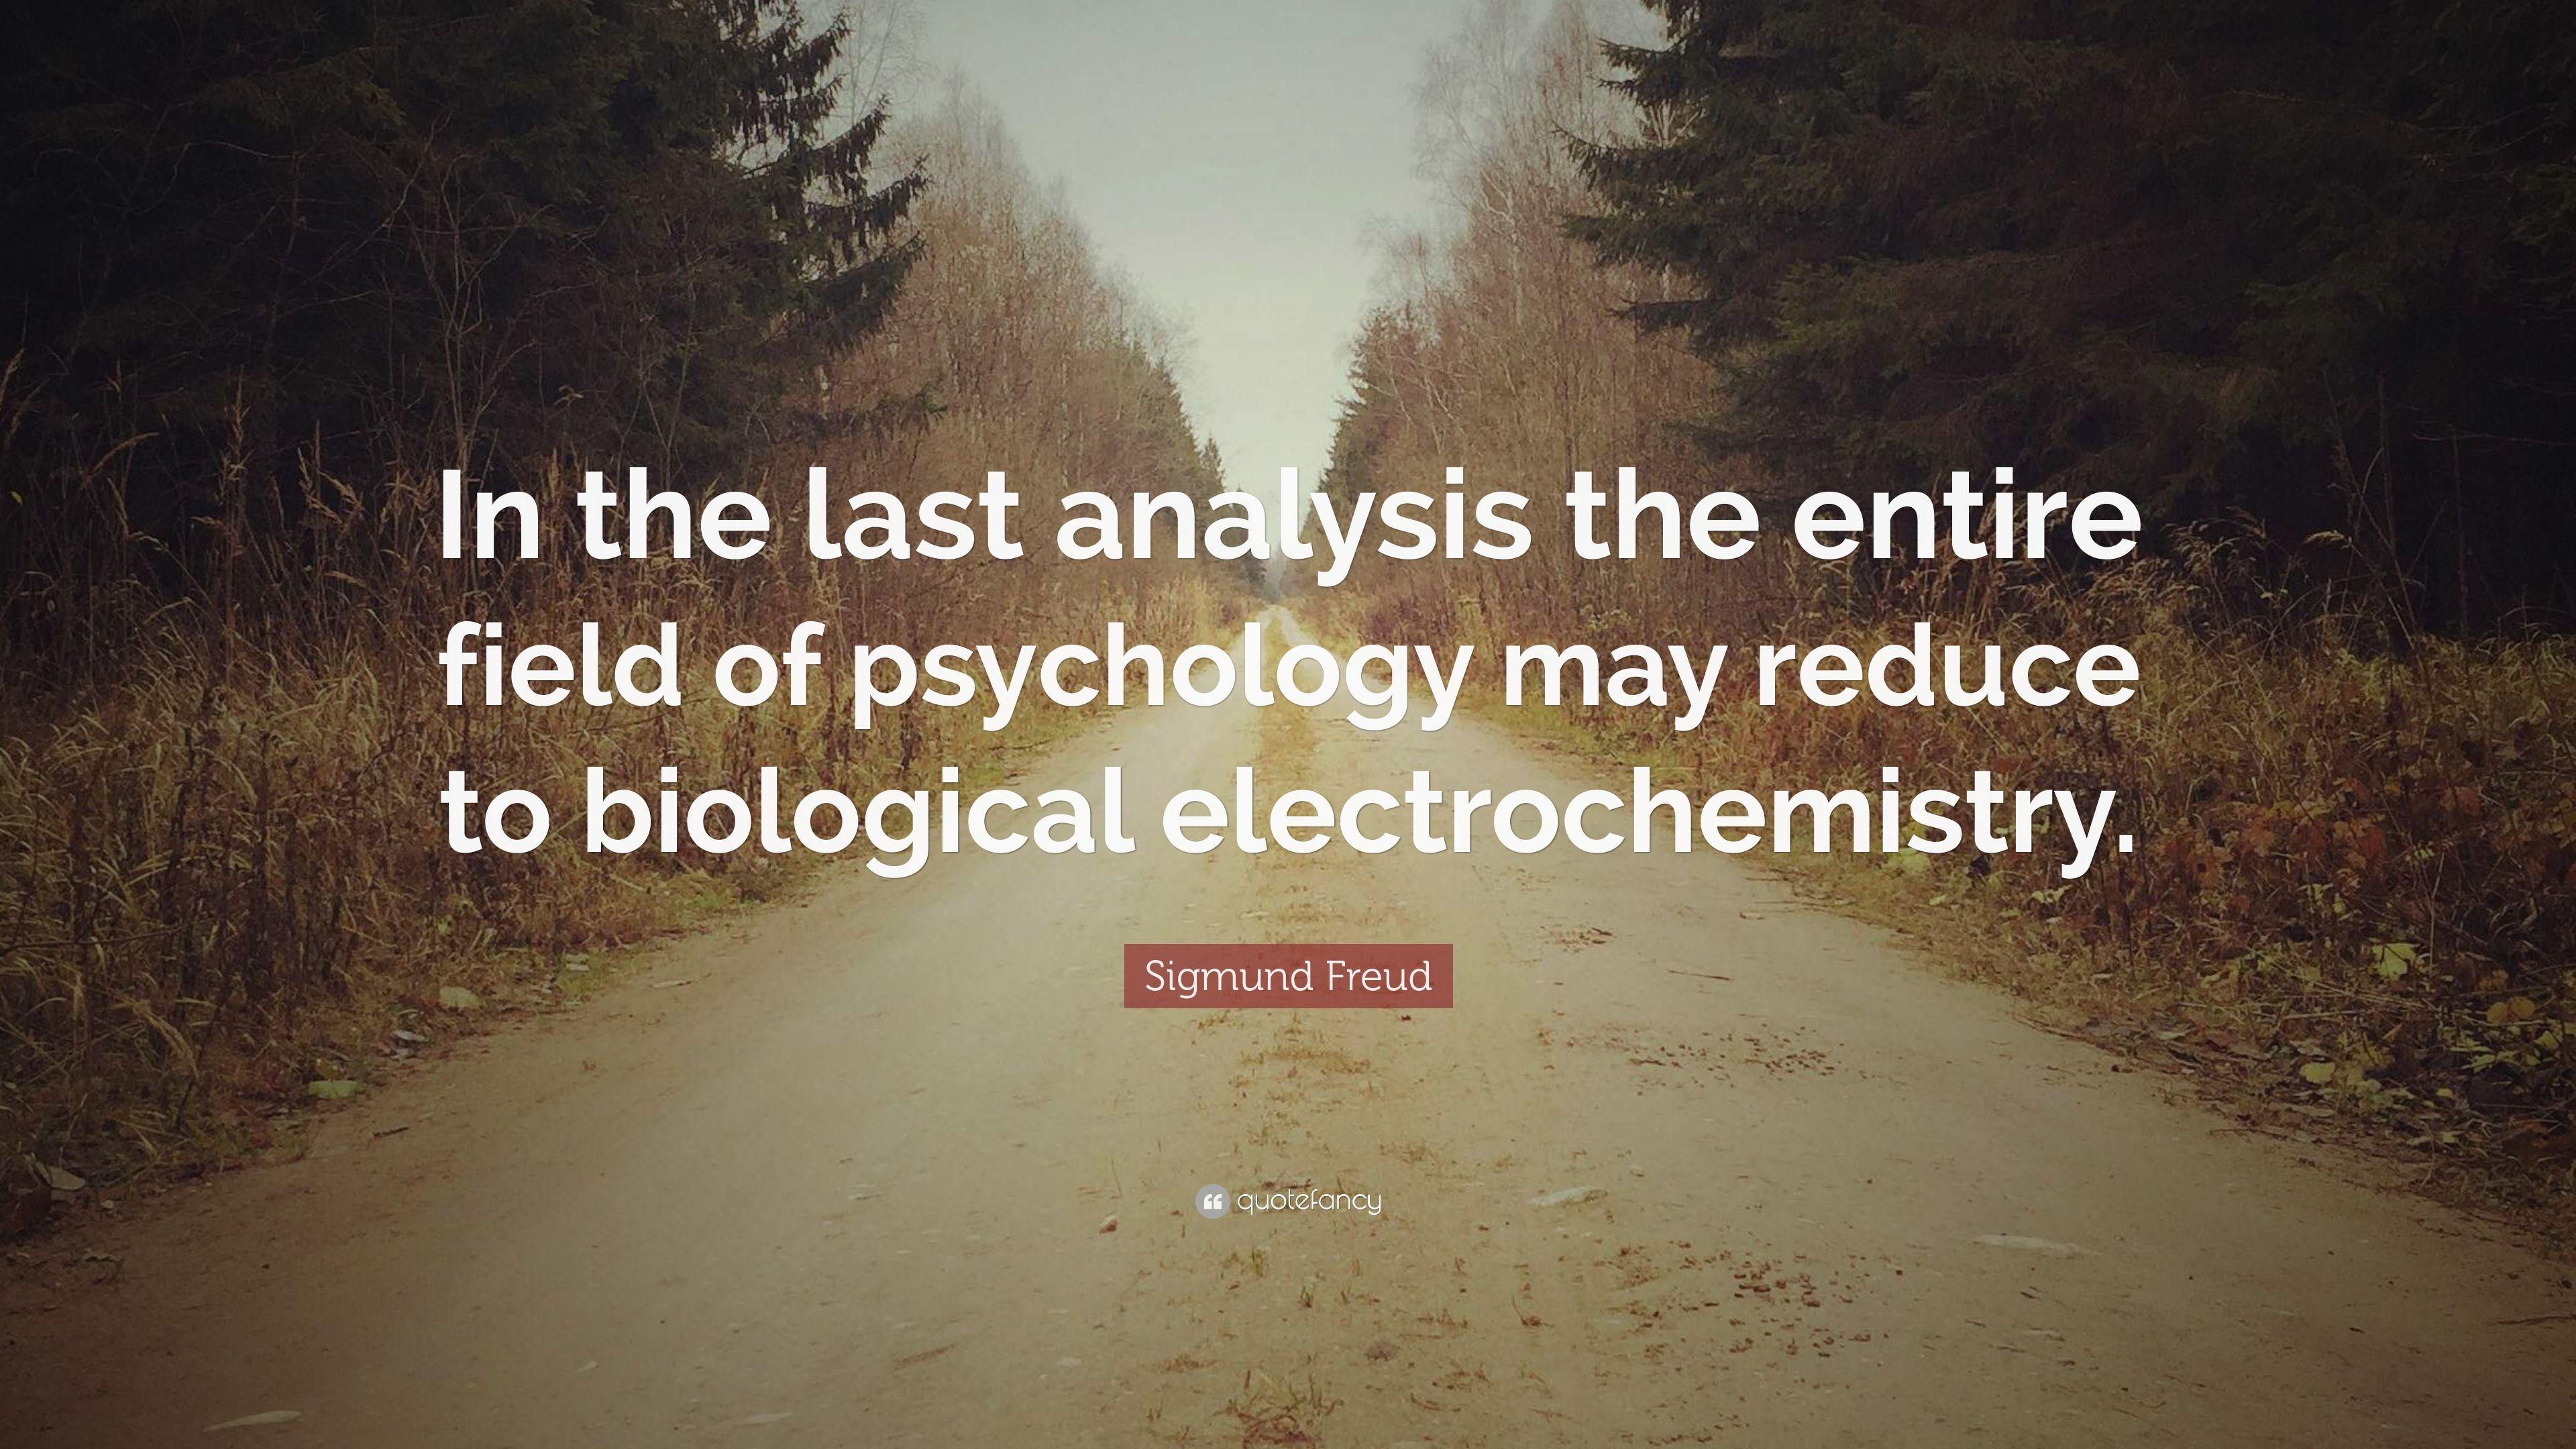 Sigmund Freud Quote: “In the last analysis the entire field